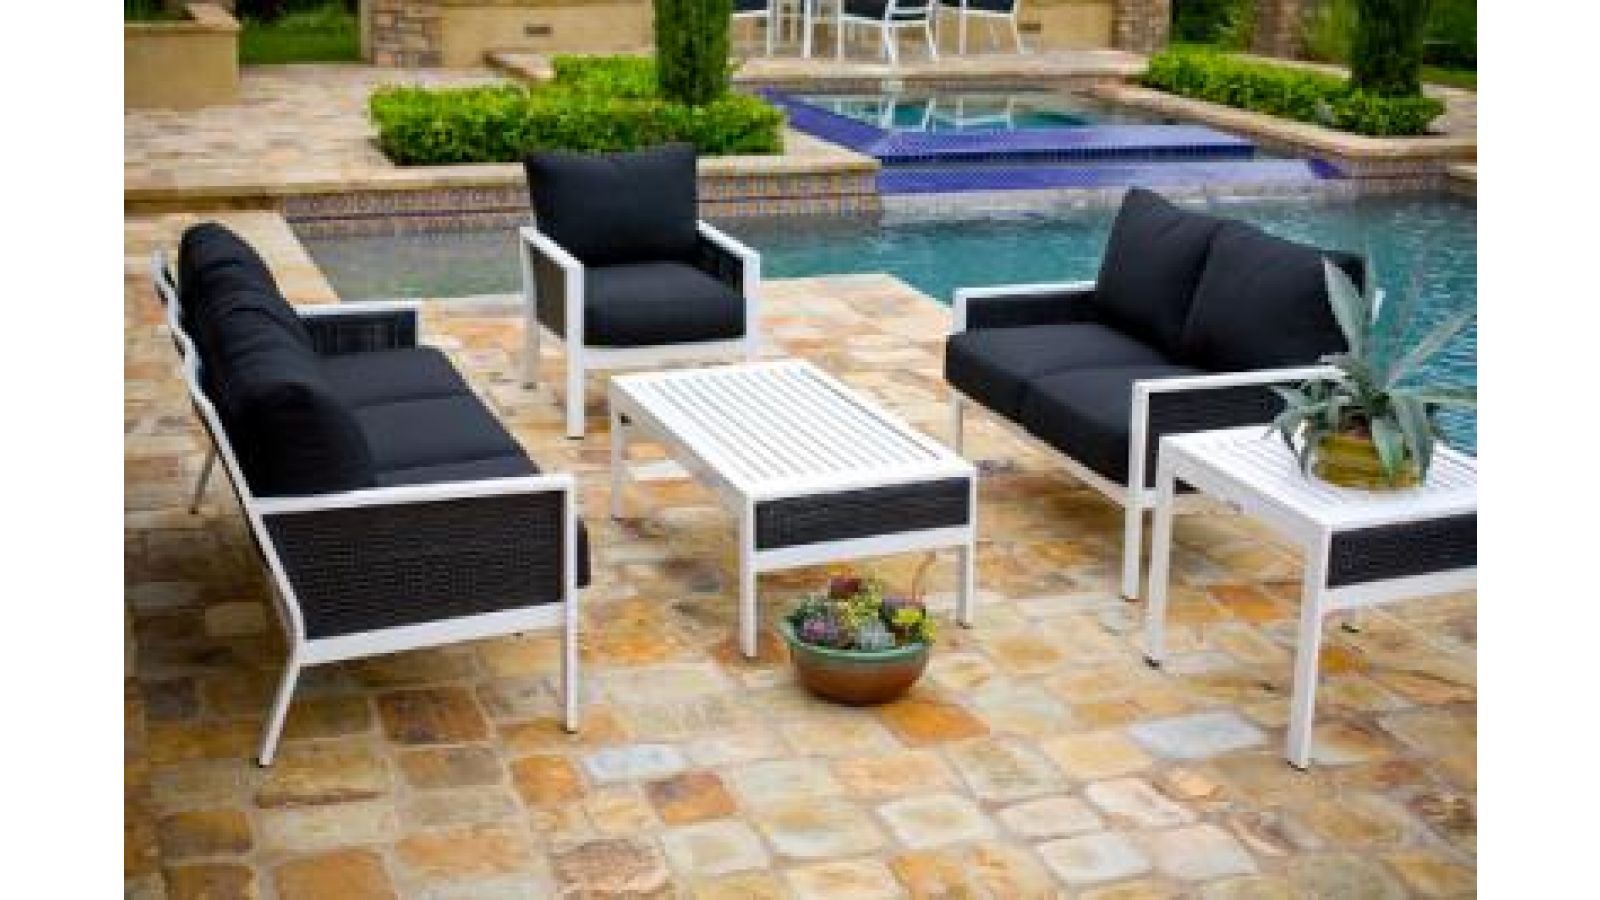 Parkview Woven Deep Seating Group 6753